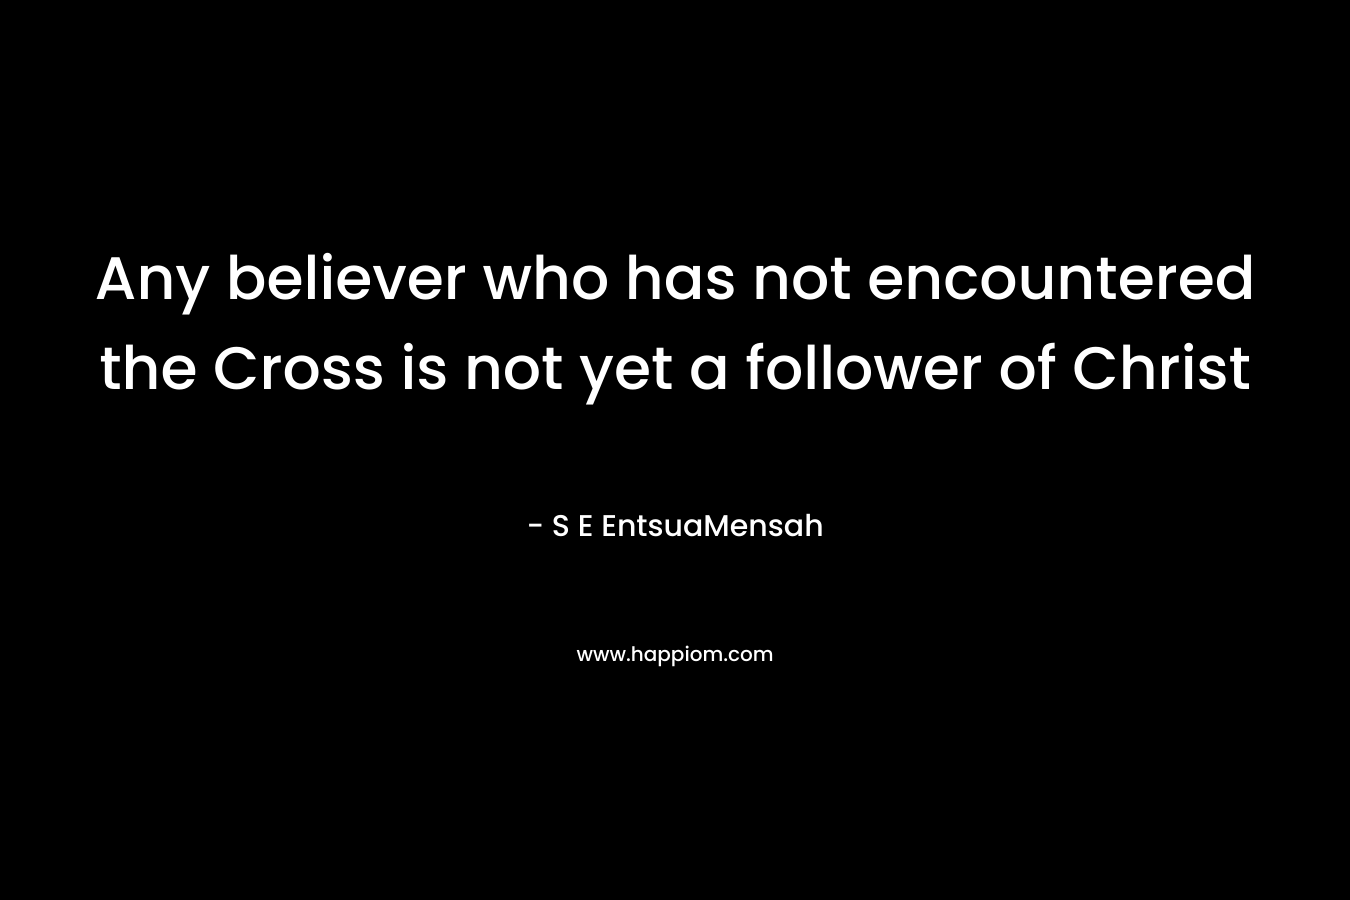 Any believer who has not encountered the Cross is not yet a follower of Christ